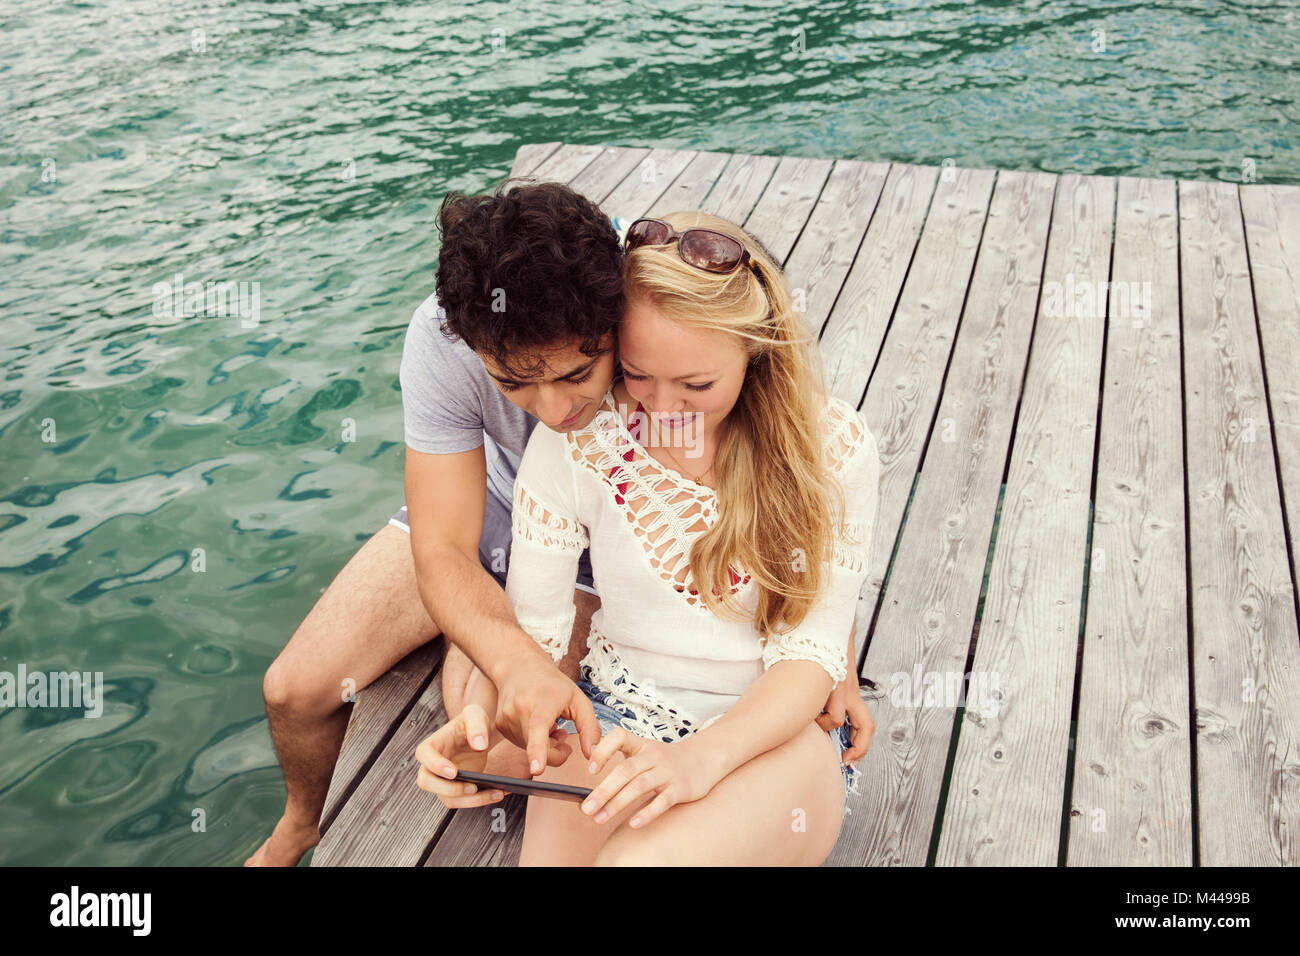 Couple sitting on pier looking at smartphone Banque D'Images